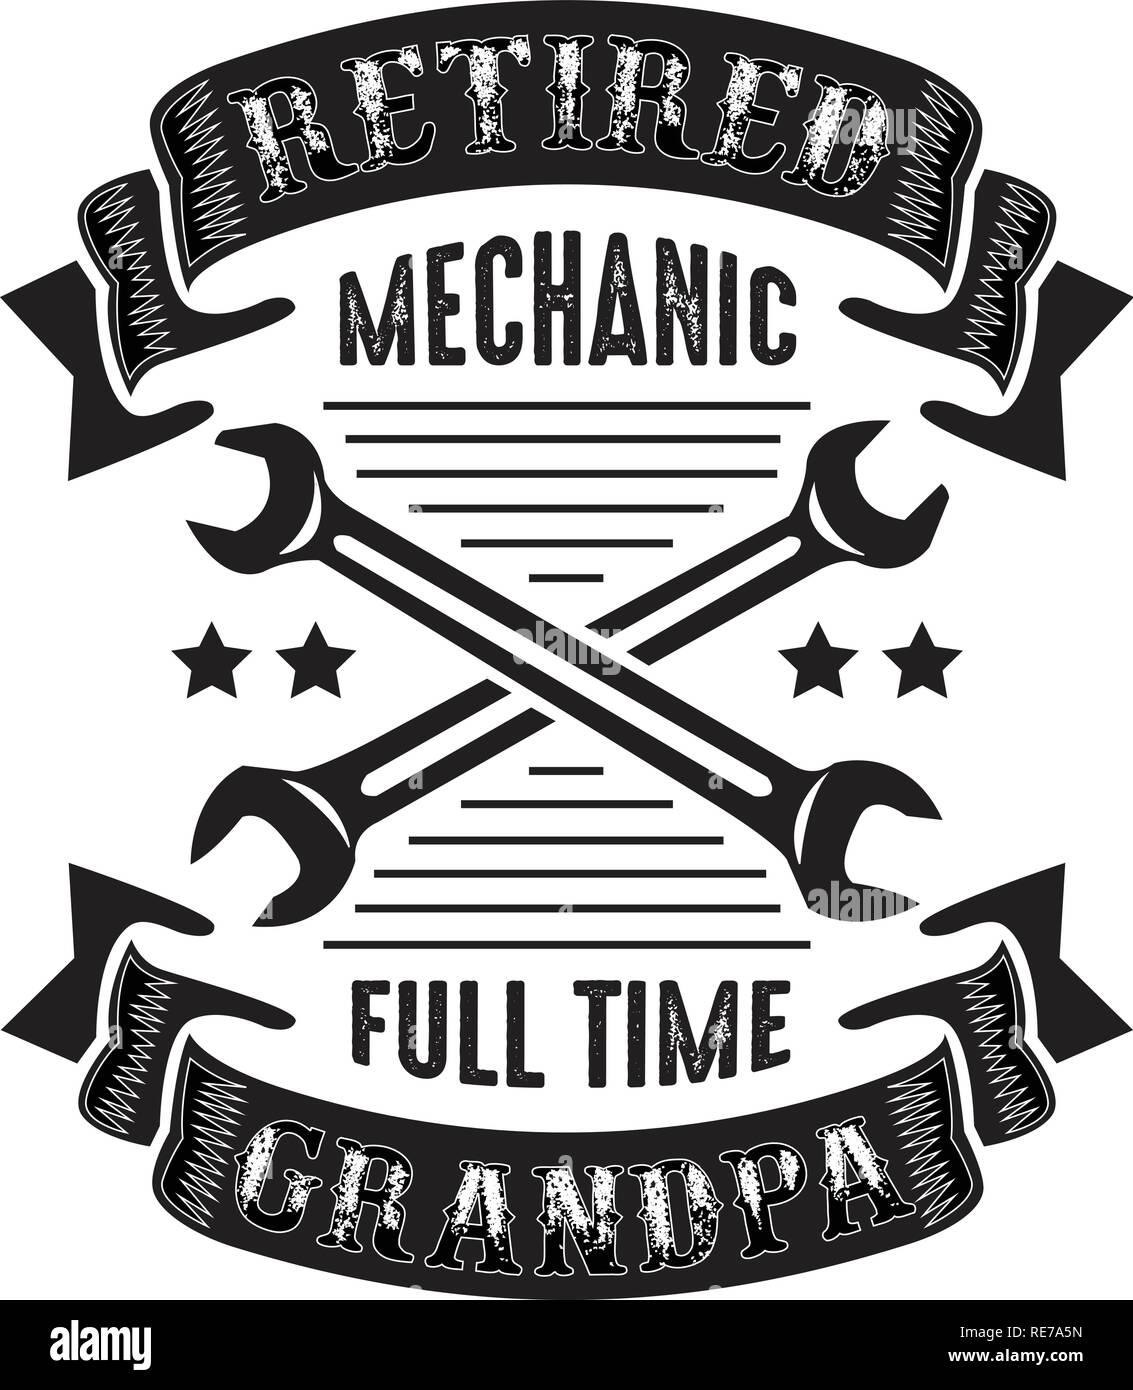 Mechanic Quote and Saying. 100 vector best for graphic in your goods Stock Vector